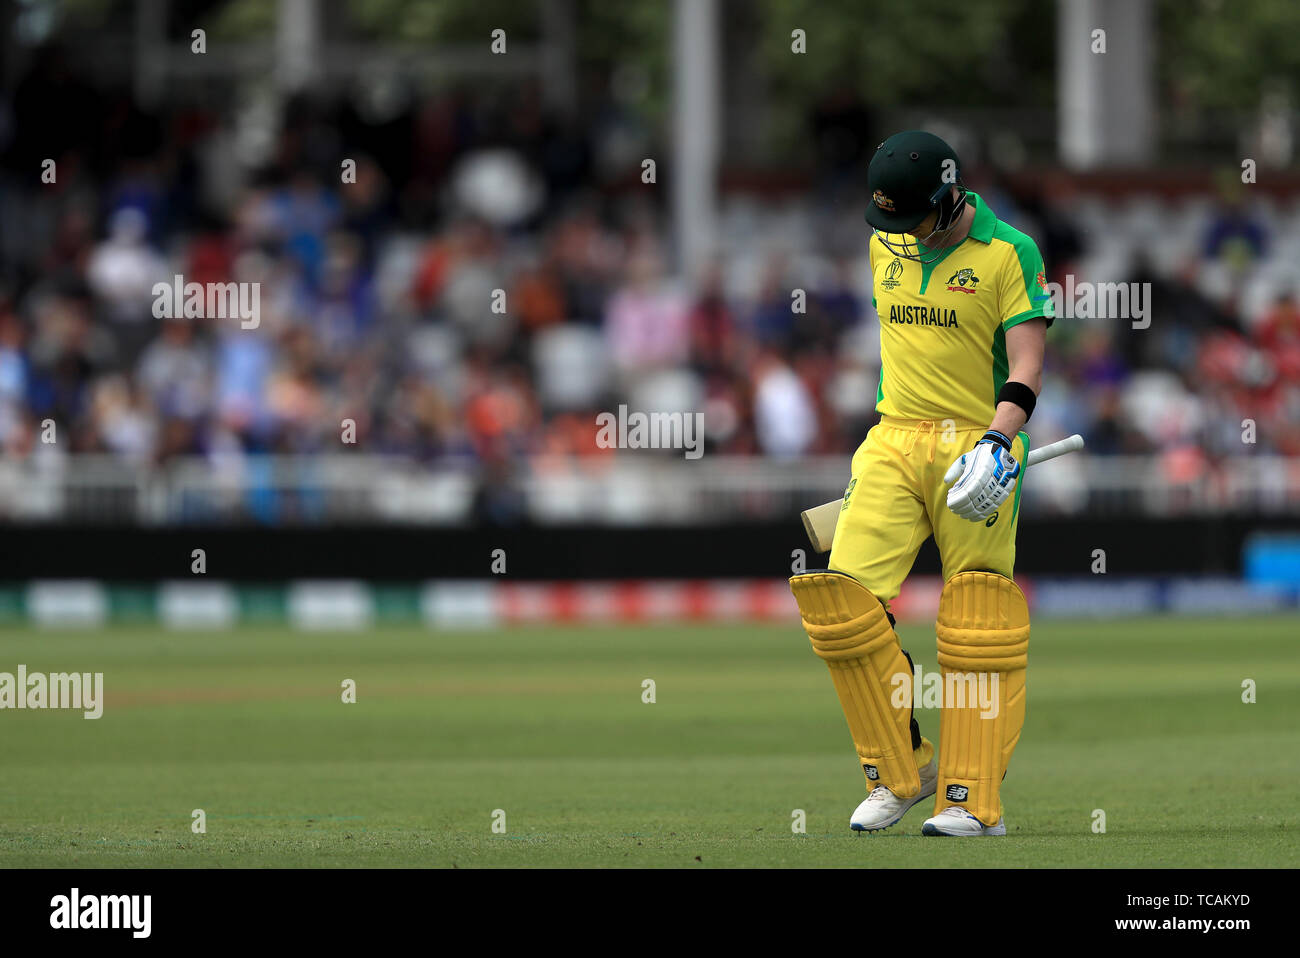 Australia's Steve Smtih leaves the field after being dismissed during the ICC cricket World Cup group stage match at Trent Bridge, Nottingham. Stock Photo